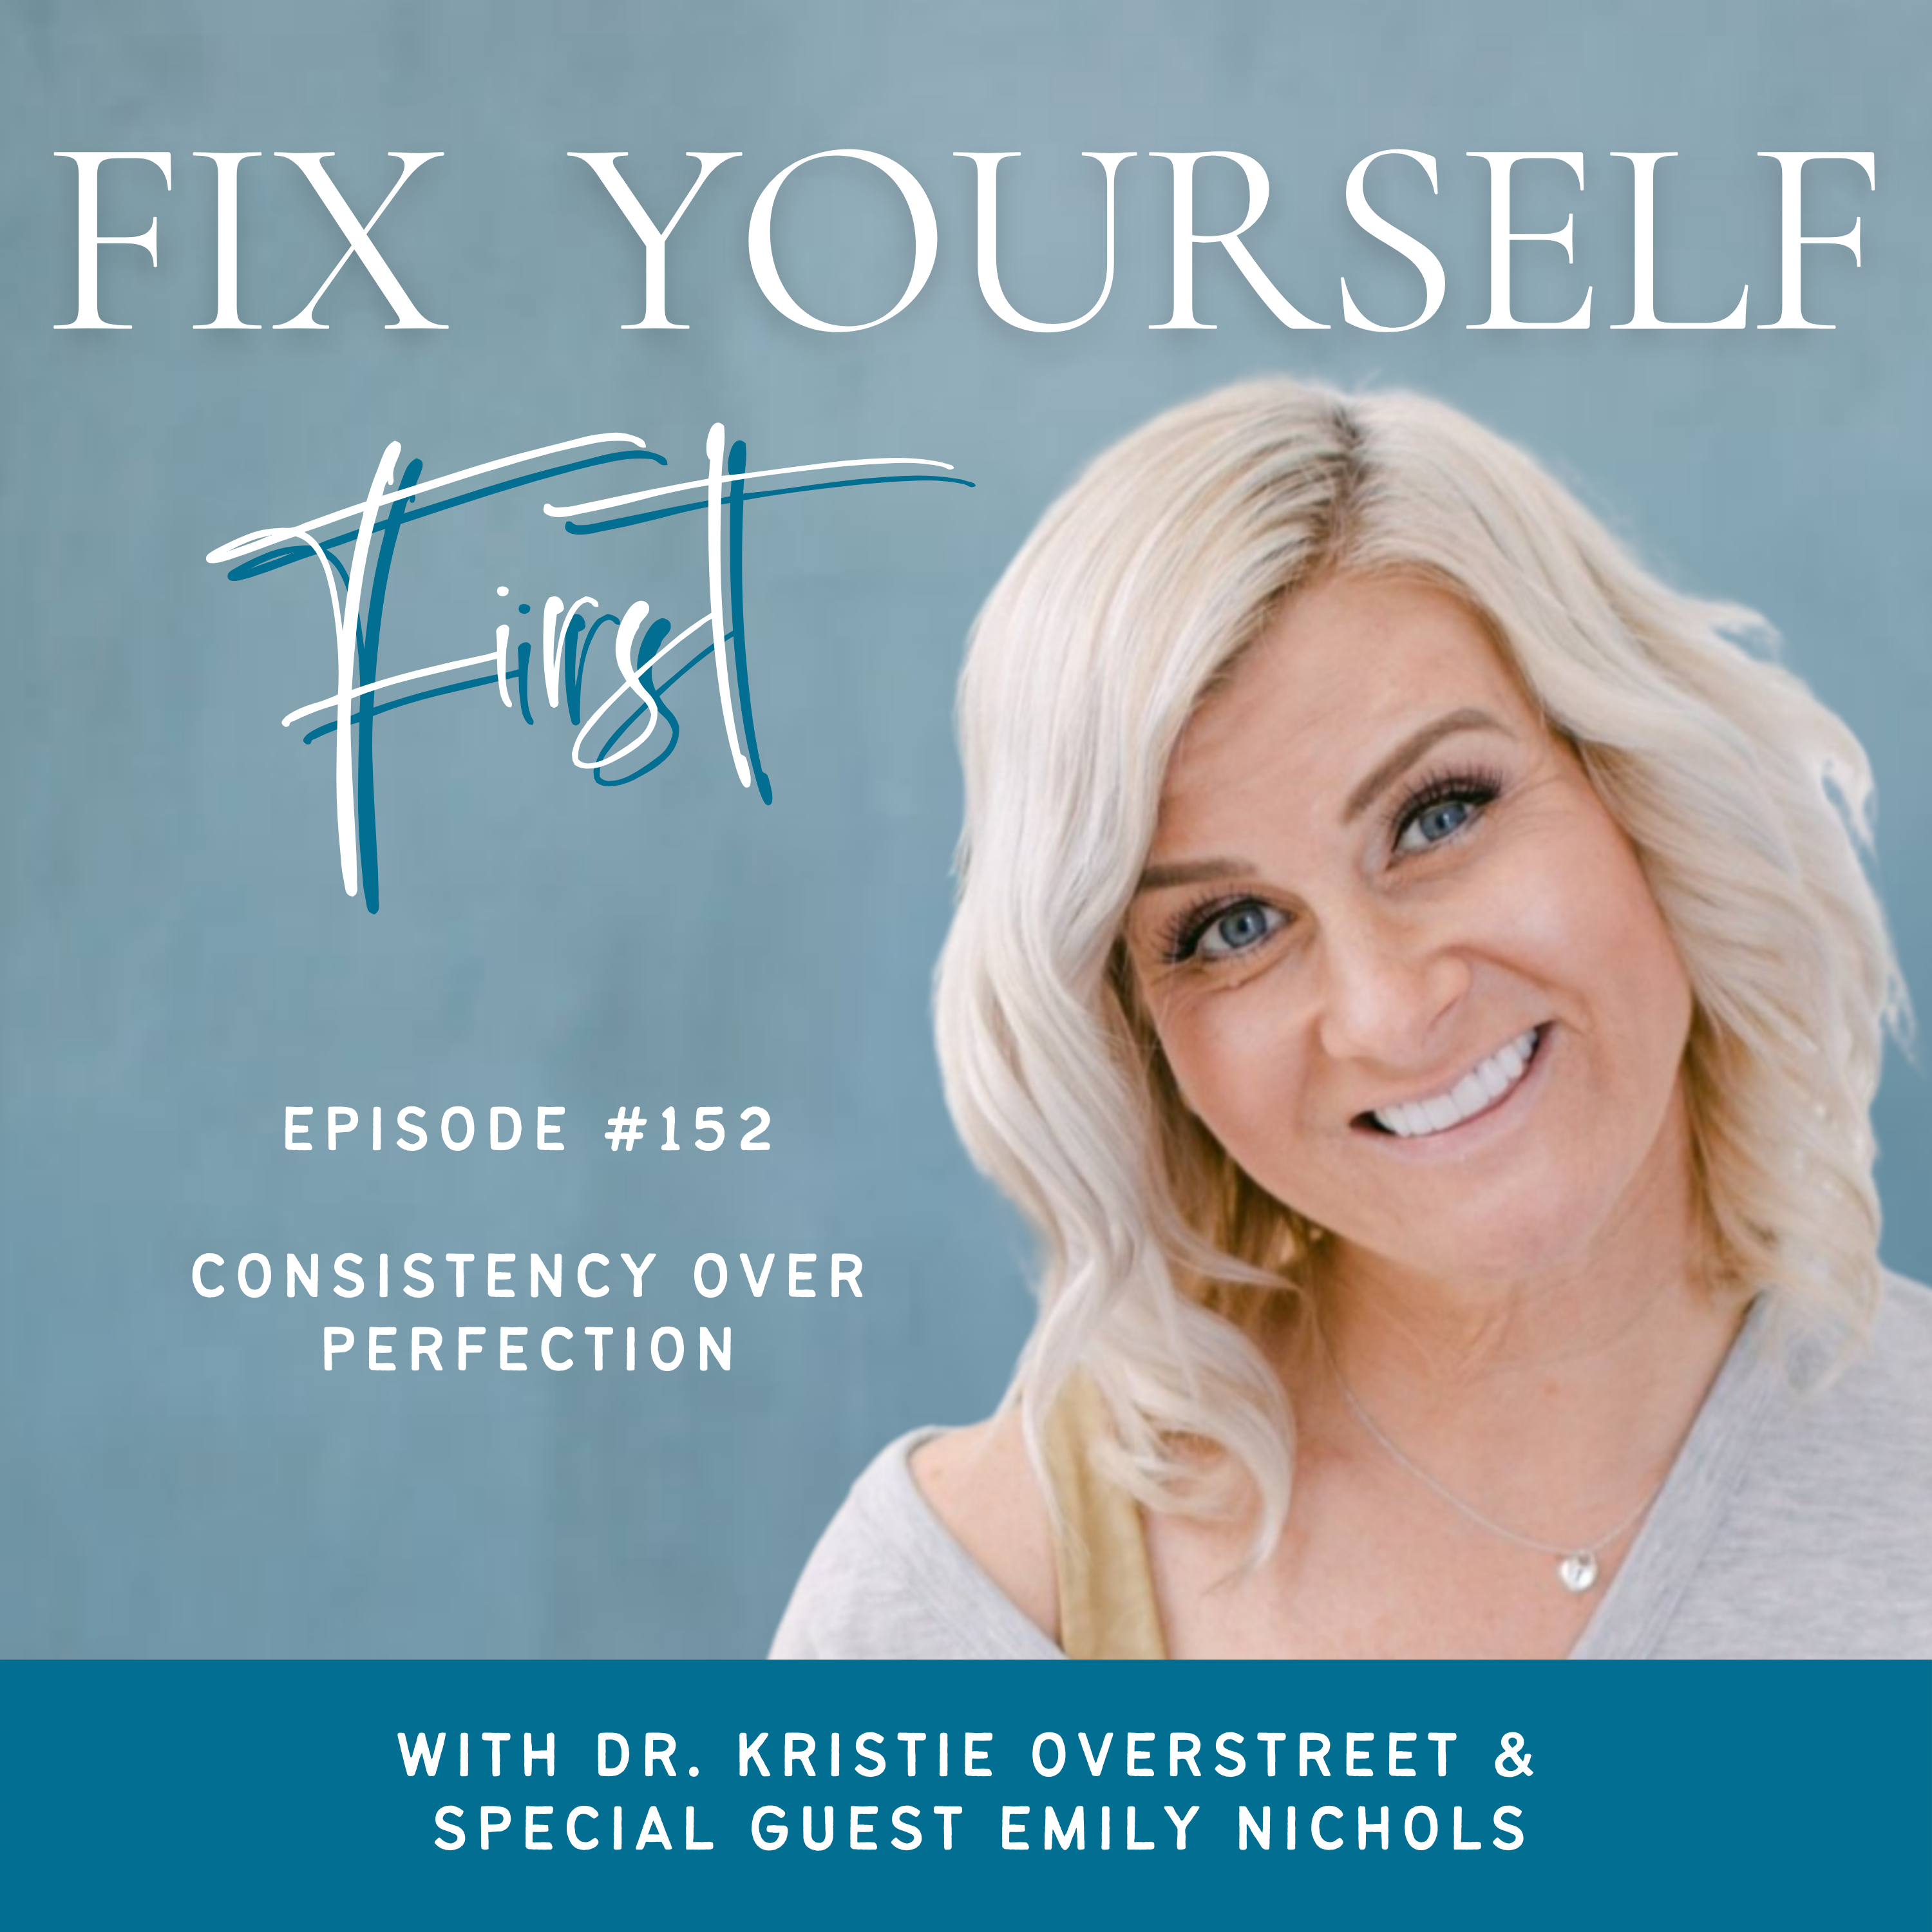 Fix Yourself First Episode 152 Consistency Over Perfection with Emily Nichols